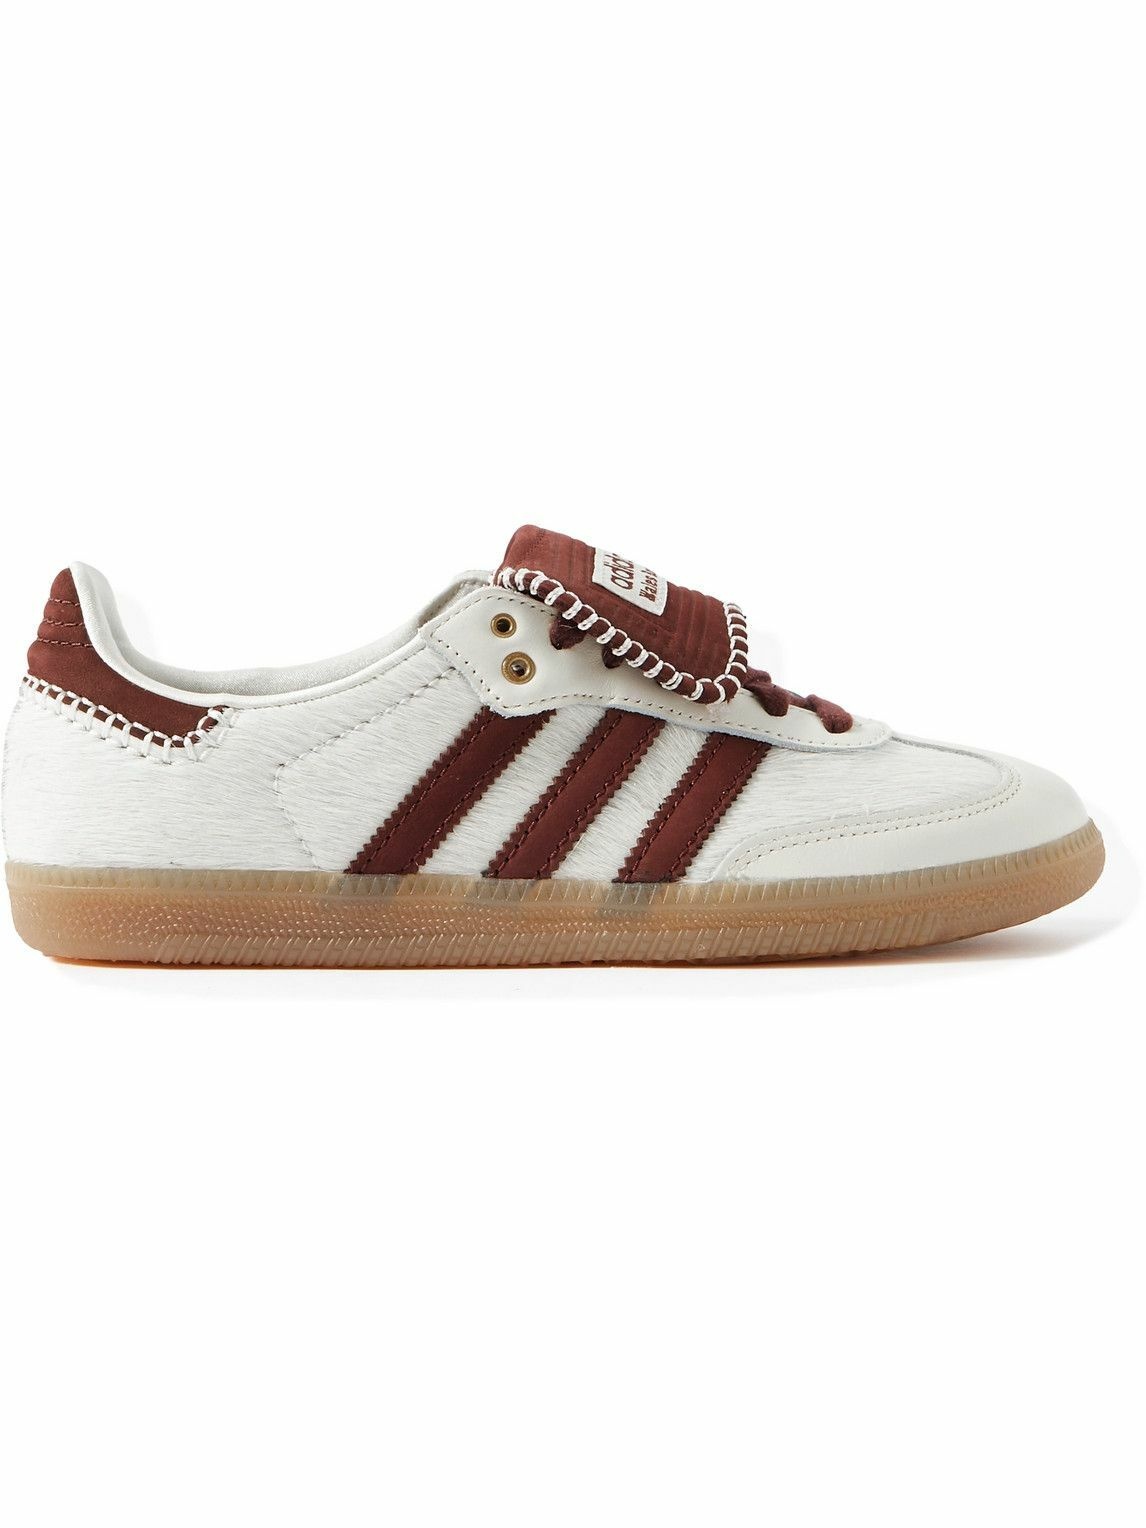 Photo: adidas Consortium - Wales Bonner Samba Leather-Trimmed Pony Hair Sneakers - White